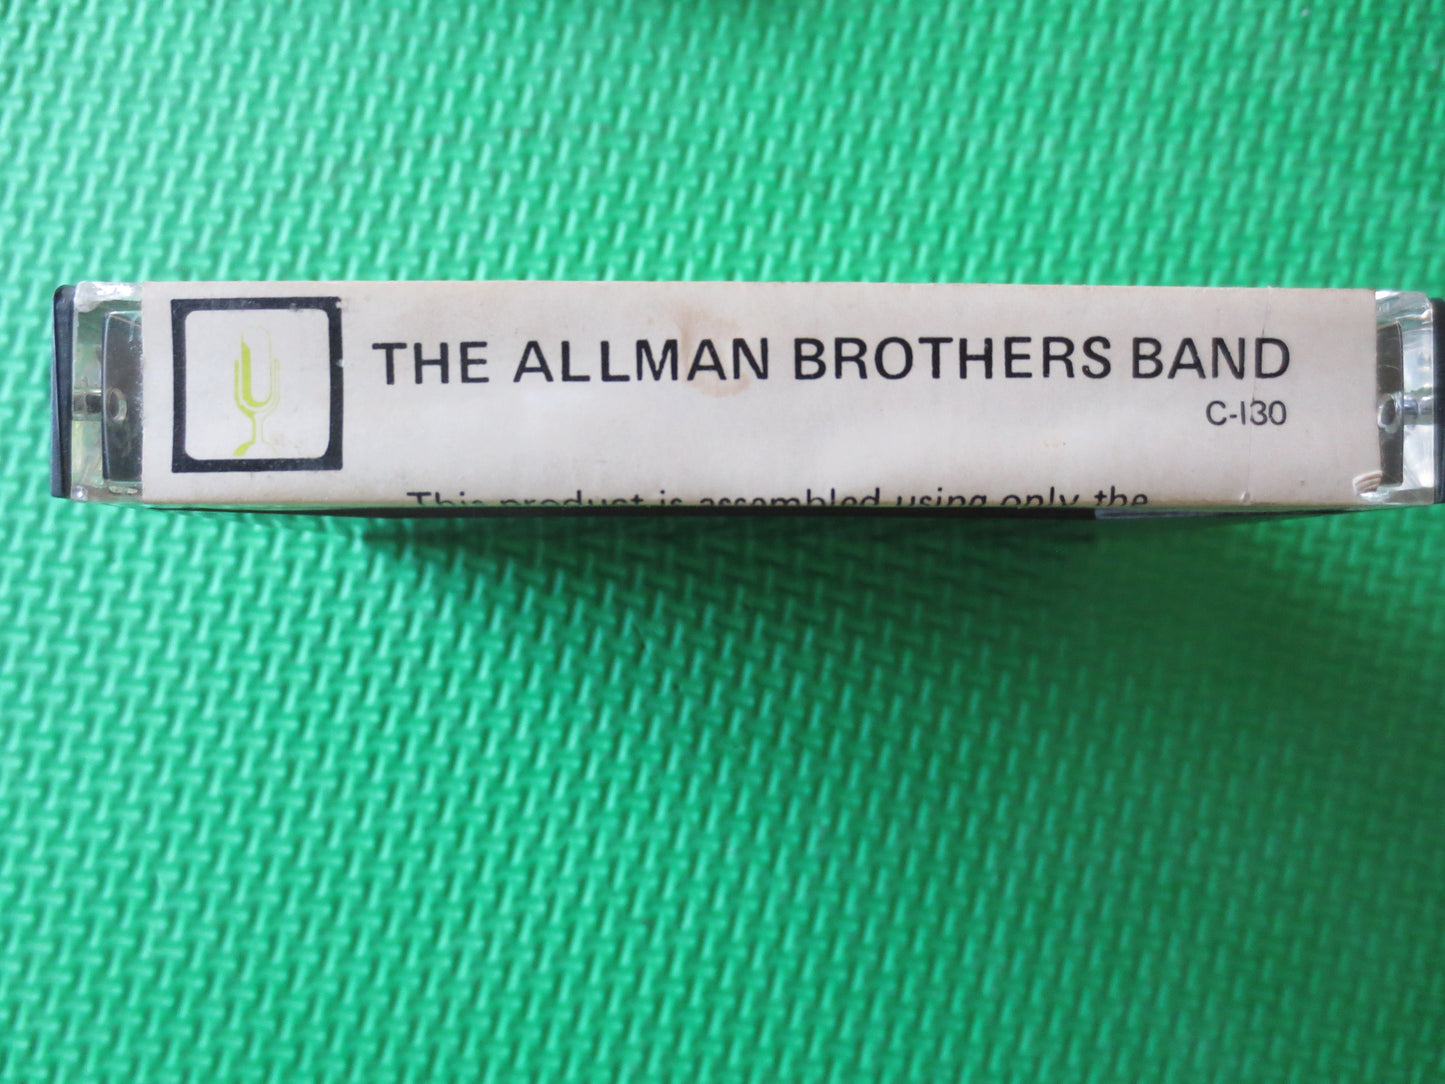 The ALLMAN BROTHERS,  Allman Brothers Tape, Tape Cassette, Southern Rock Tape, Rock Tapes, Pop Music Cassette, 1972 Cassette